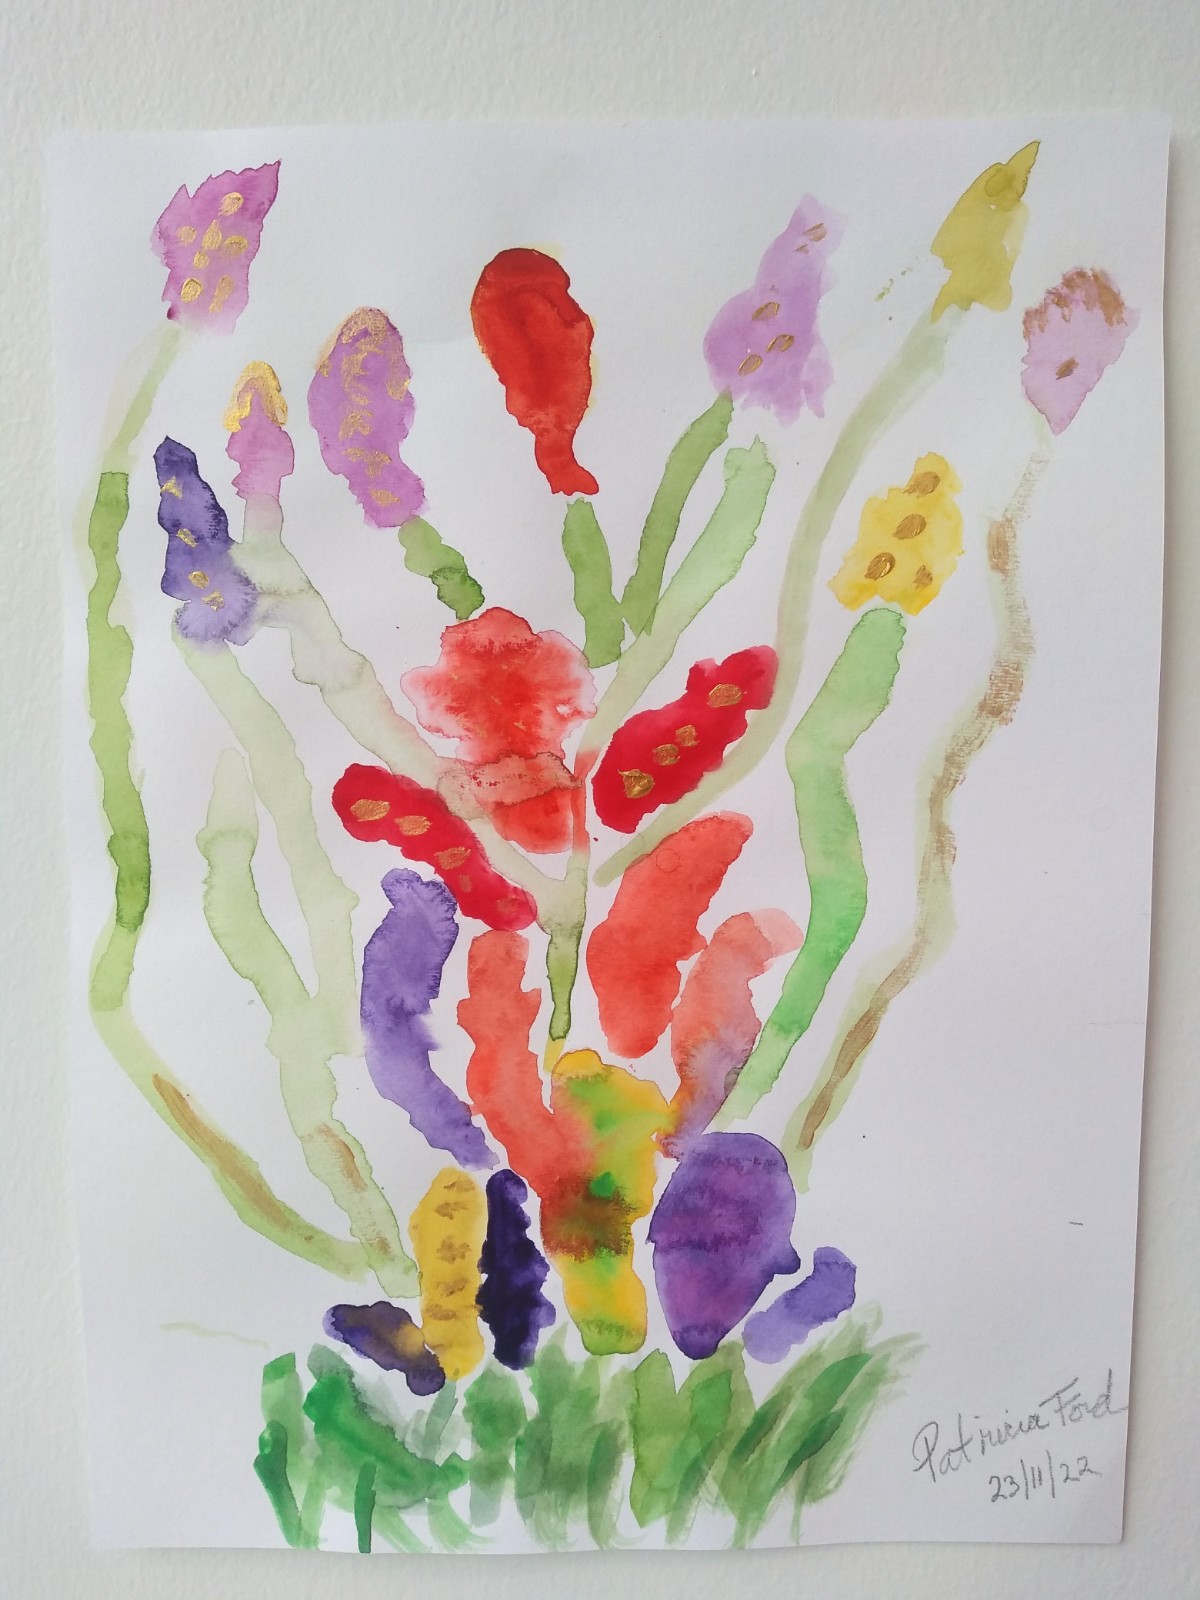 Colourful abstract watercolour of plants.